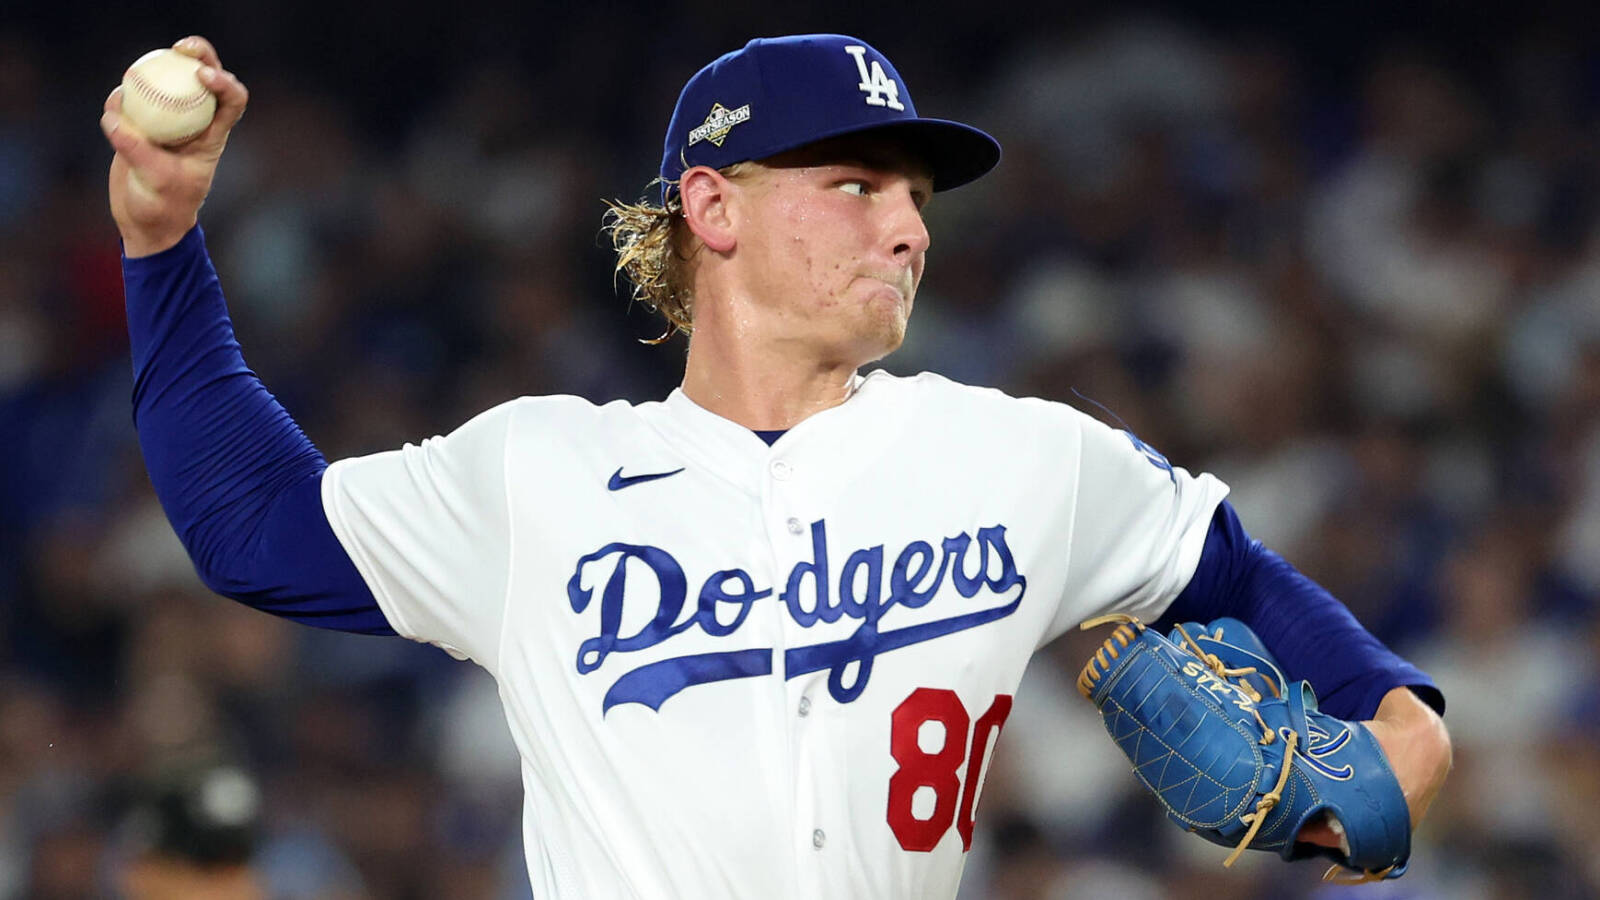 Dodgers manager confirms bad news about pitcher